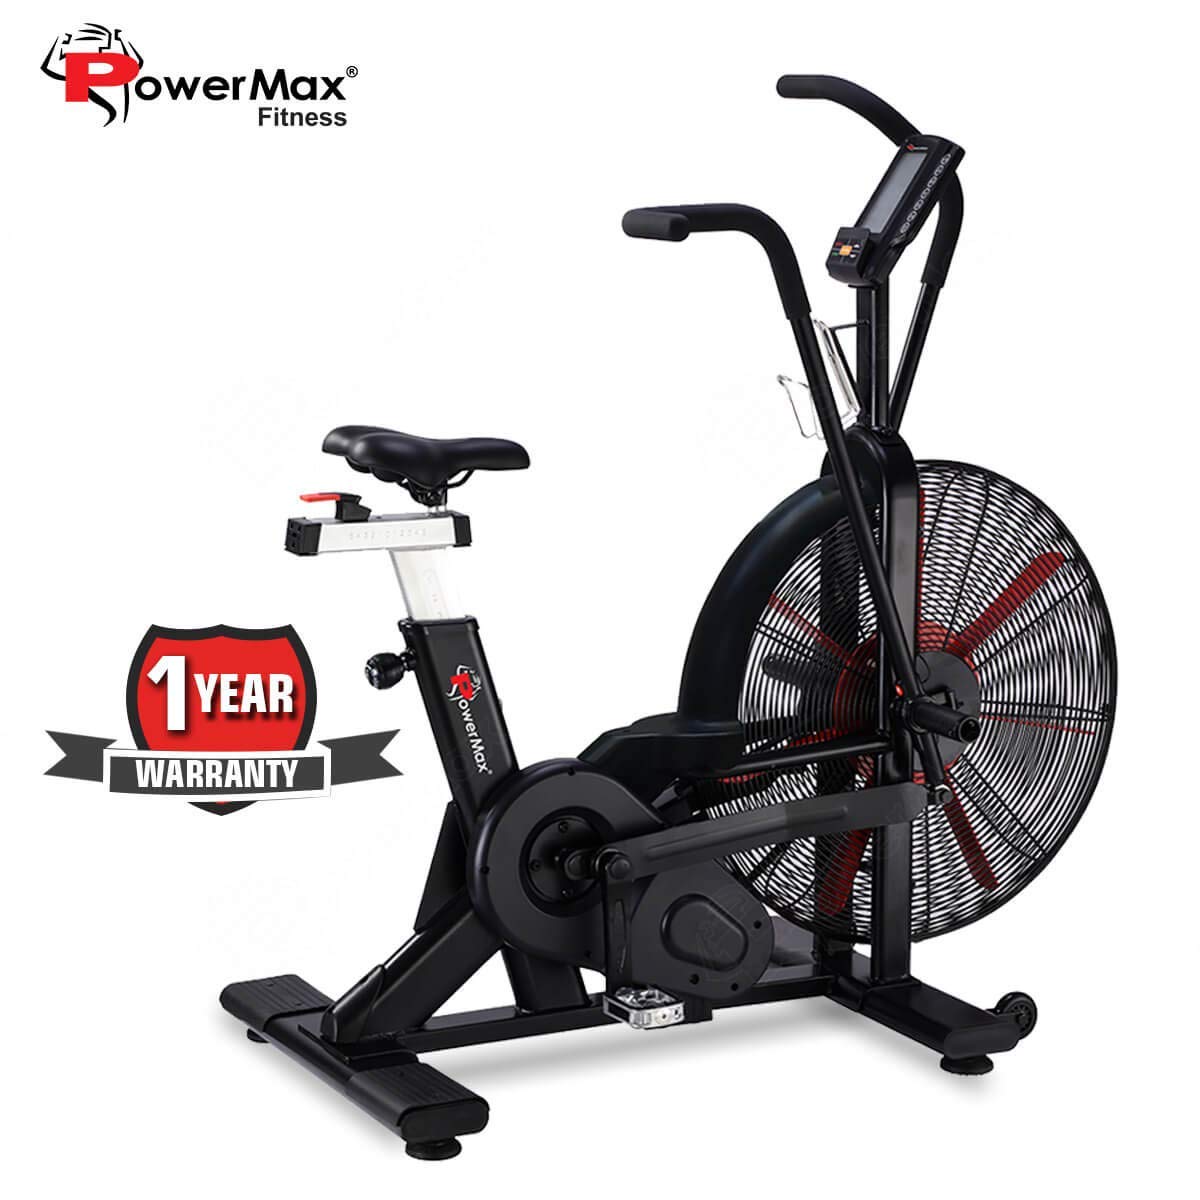 PowerMax BA-2500C Commercial Air Bike Exercise Cycle with Moving Handle Free Installation